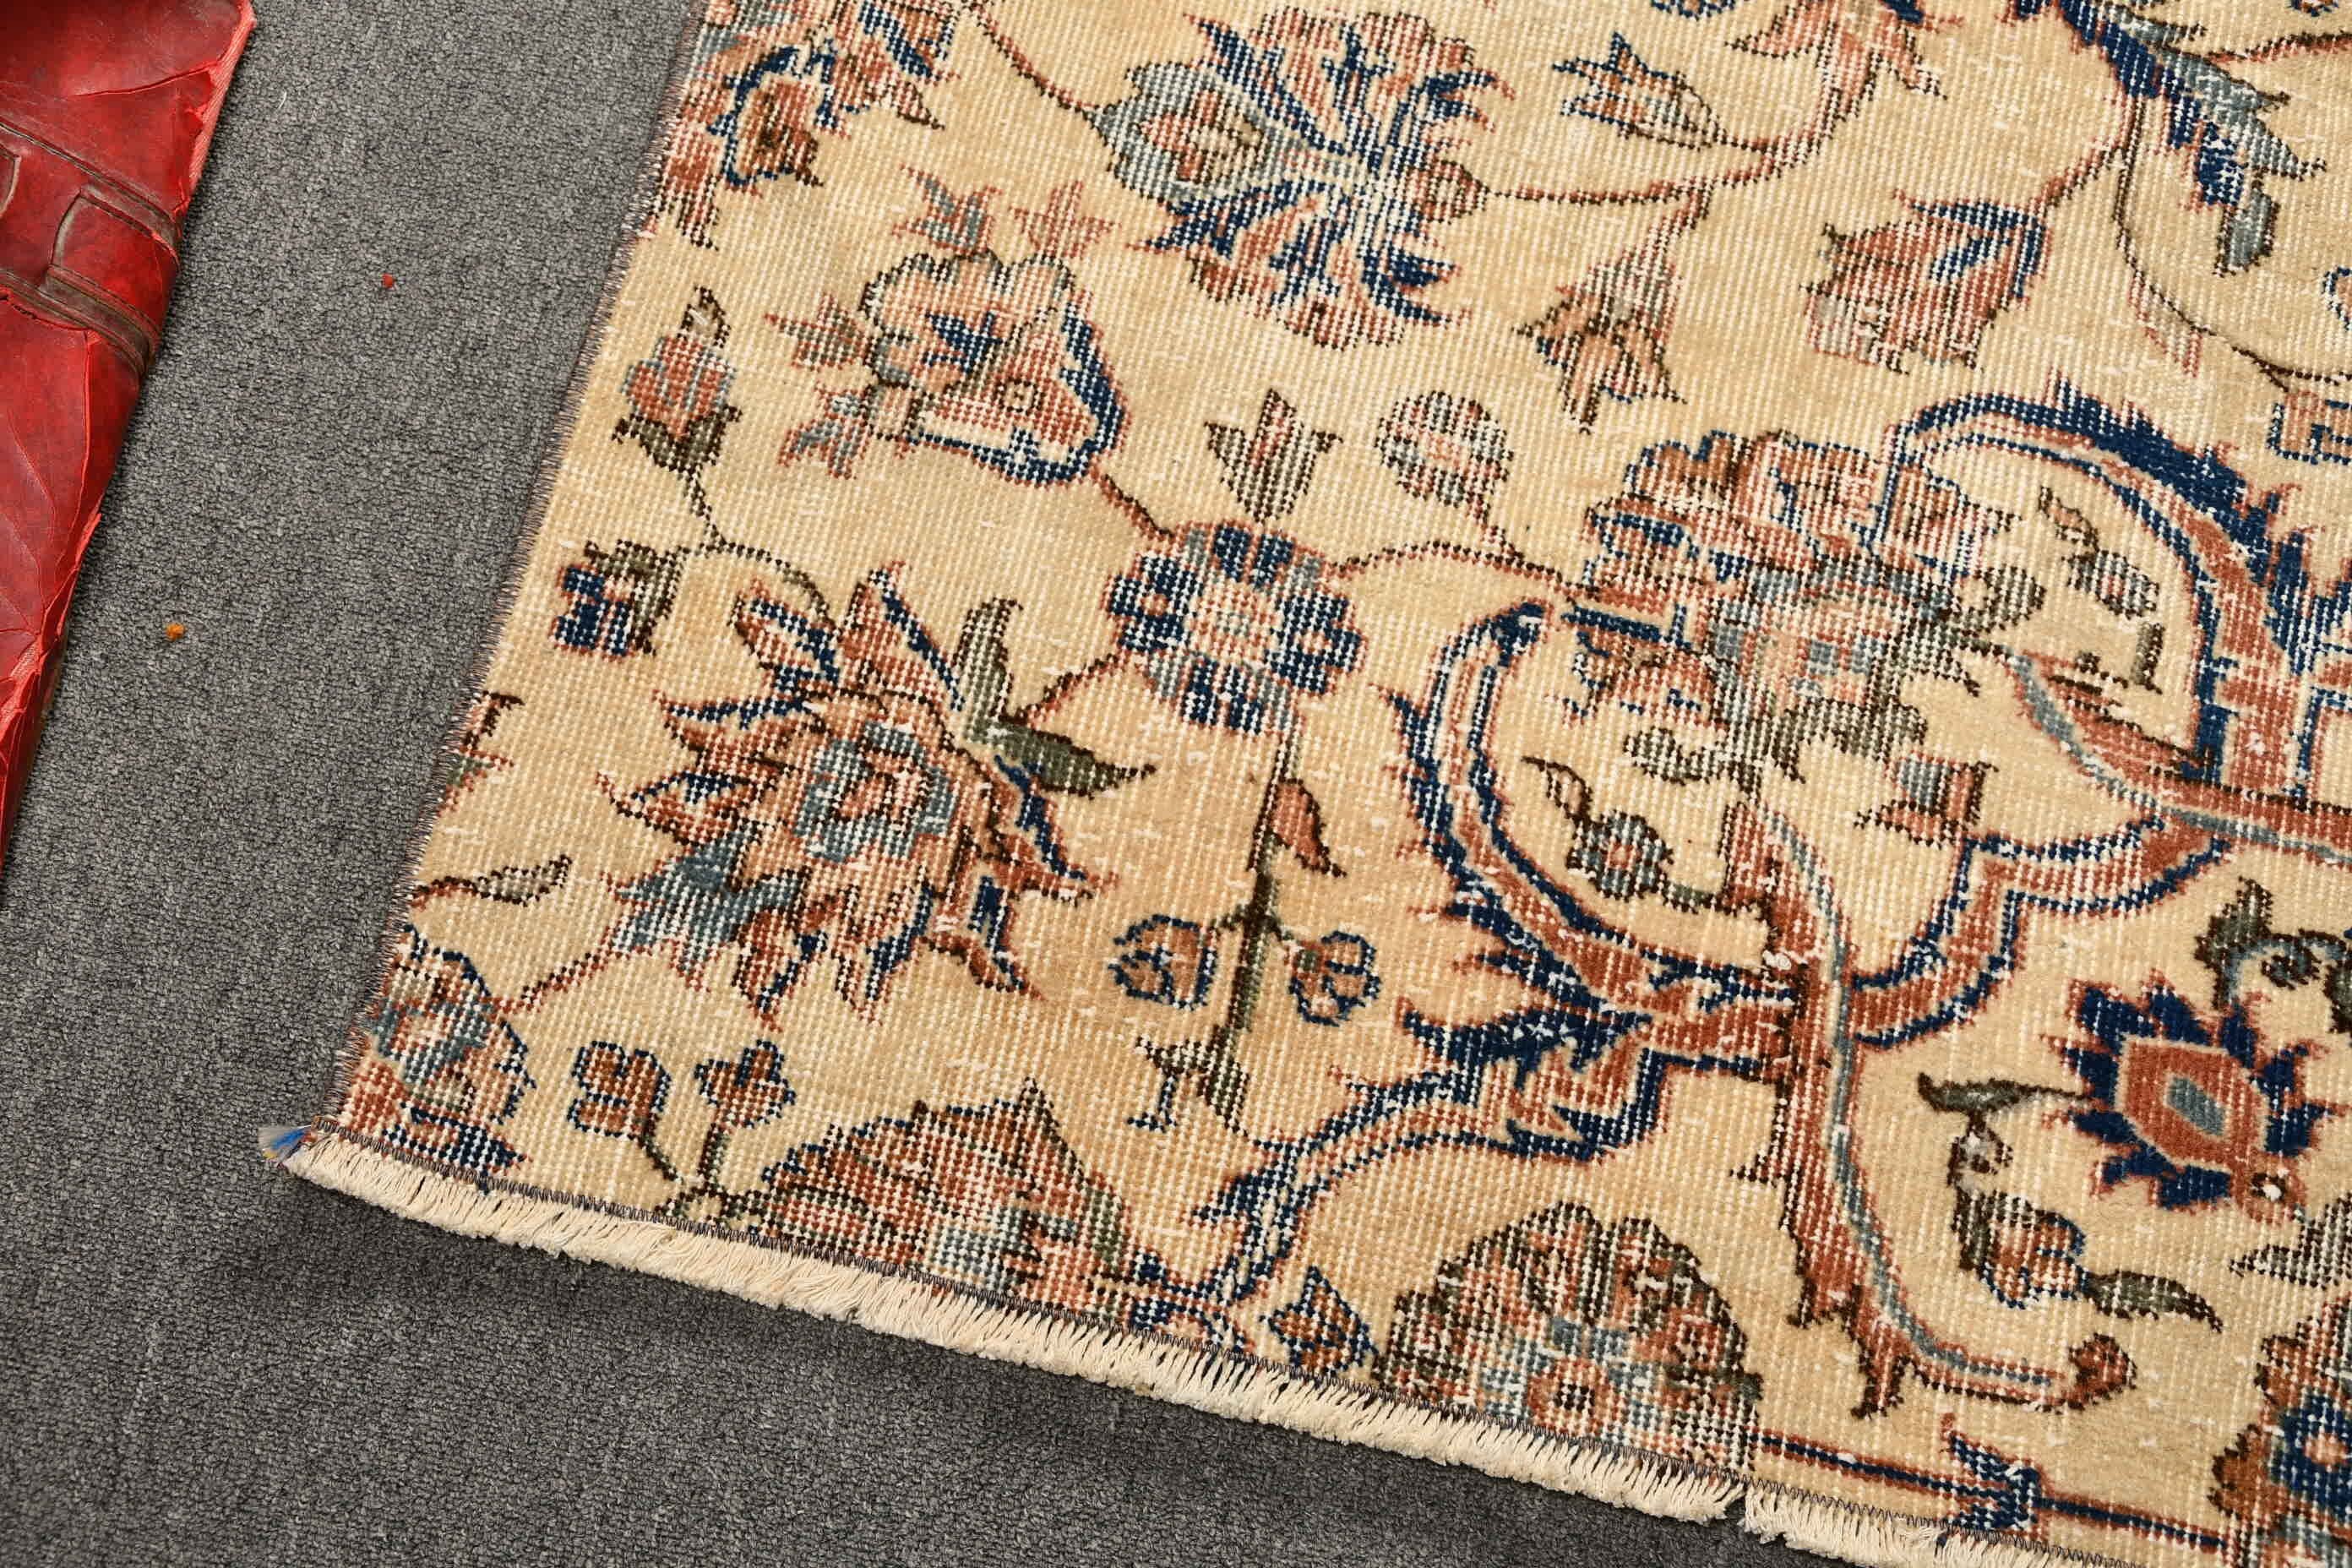 4.4x4.2 ft Accent Rugs, Rugs for Entry, Kitchen Rug, Beige Moroccan Rug, Oushak Rug, Turkish Rugs, Entry Rug, Vintage Rugs, Oriental Rugs